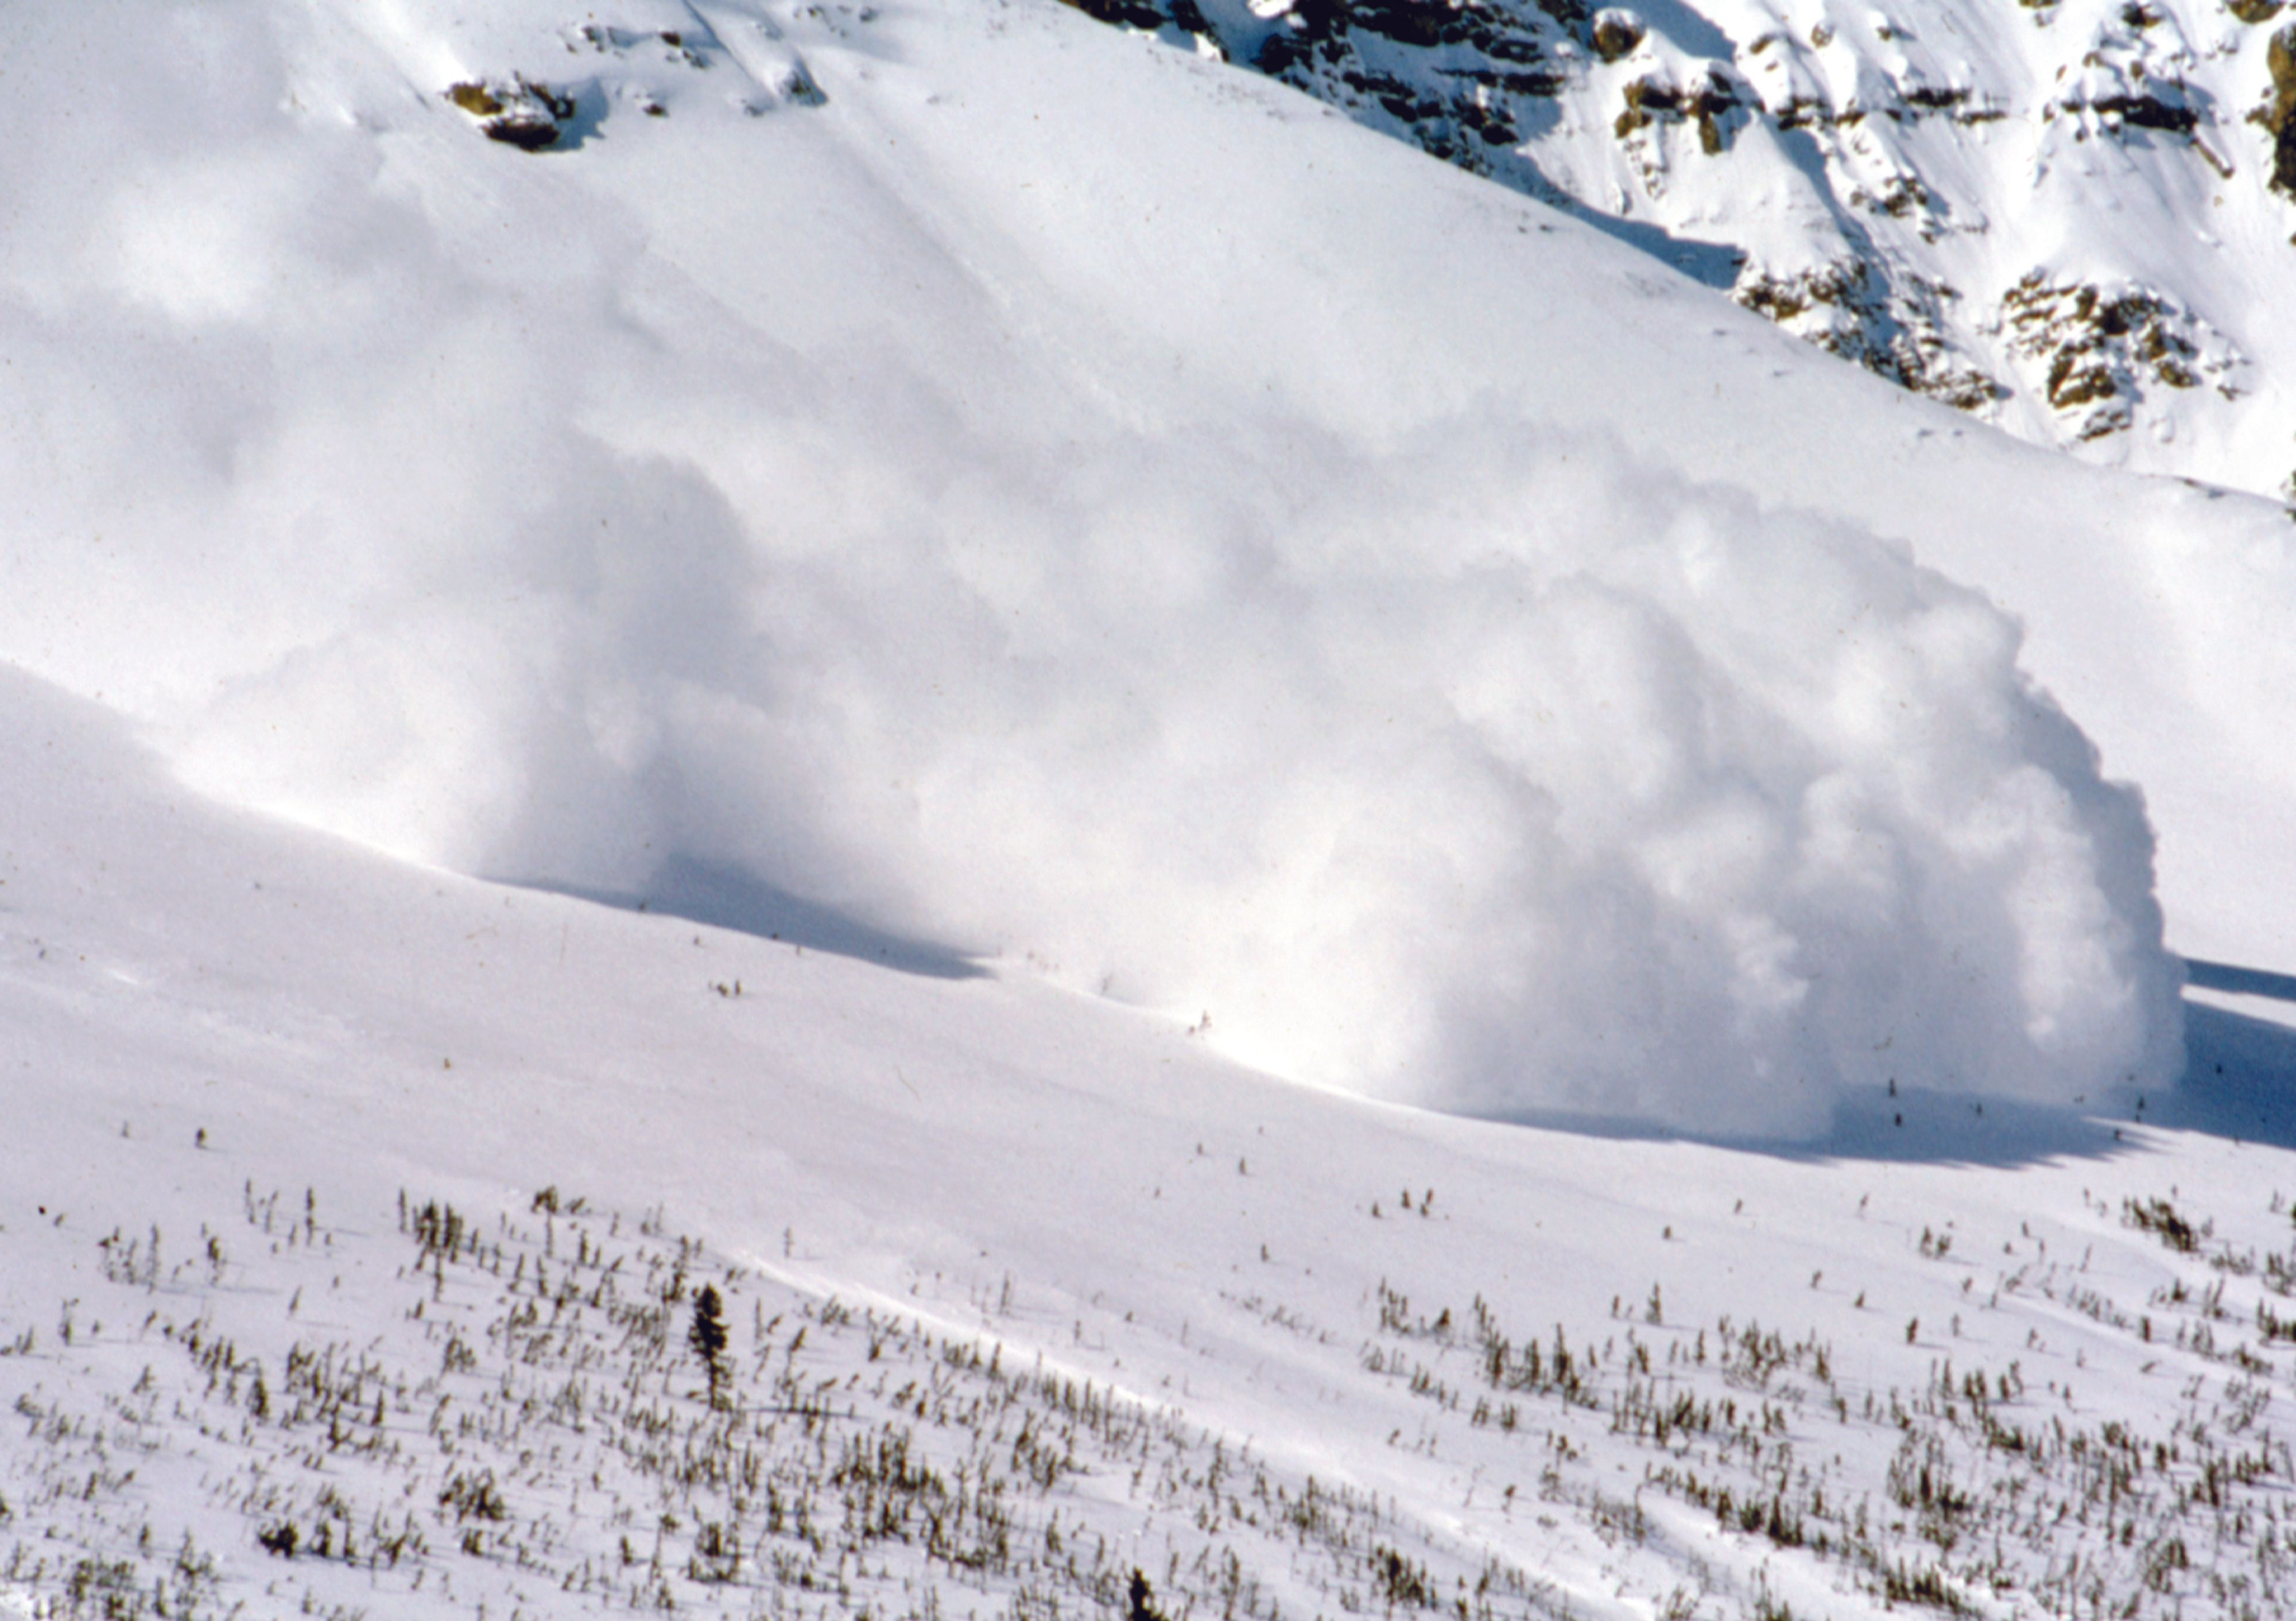 A large avalanche in the Rocky Mountains dwarfs the trees in its path.